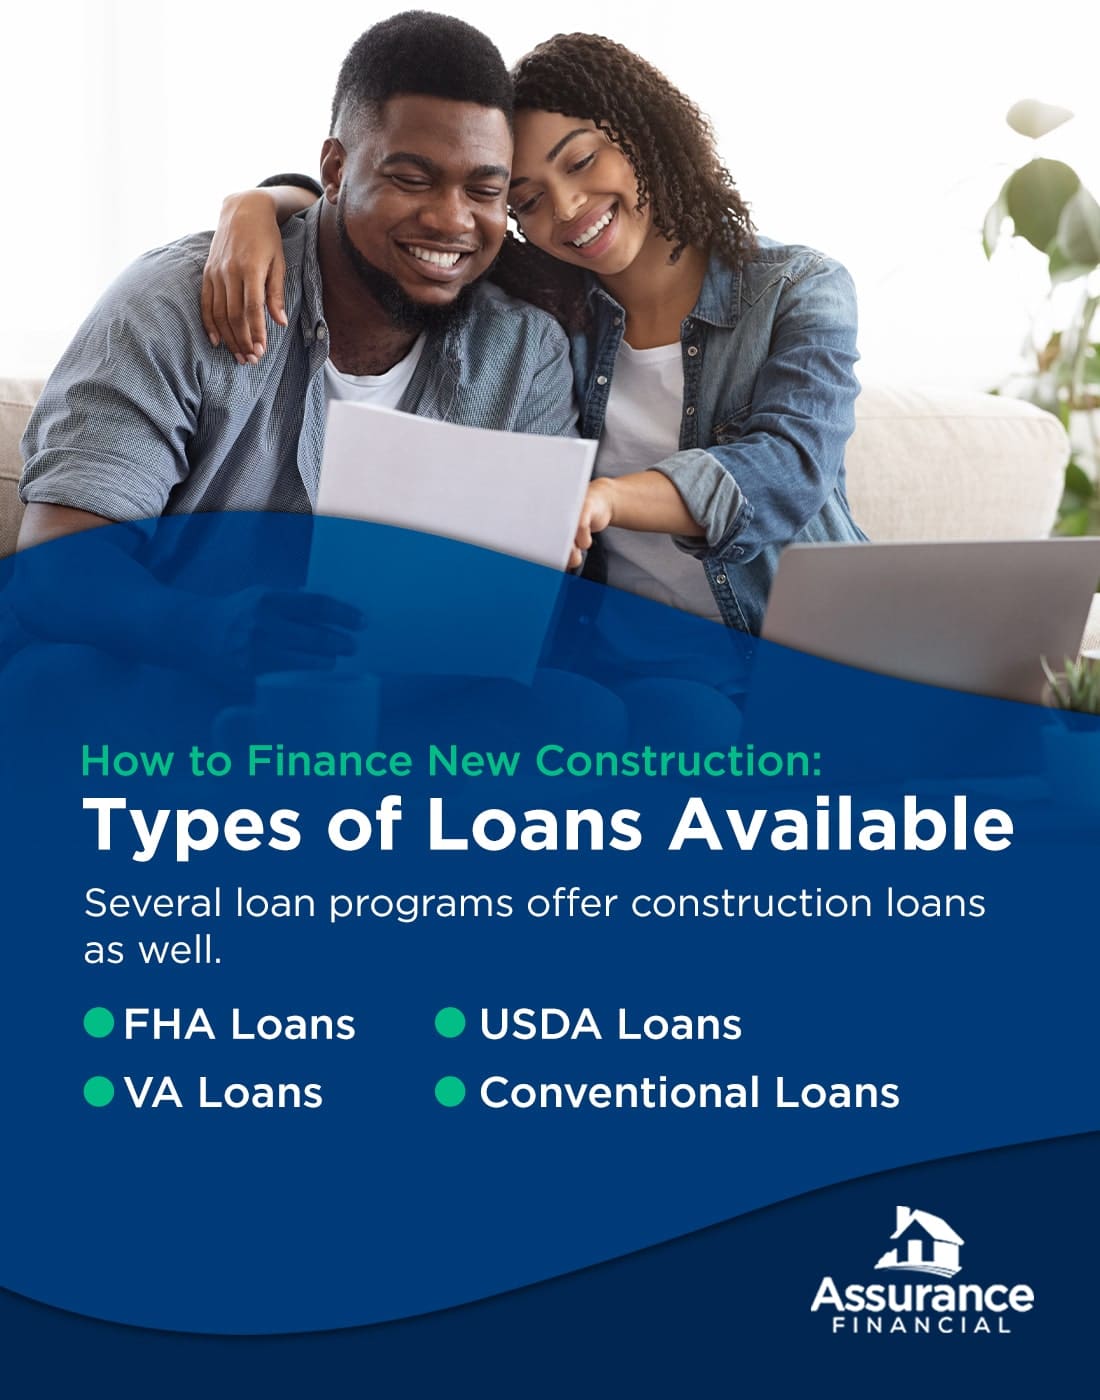 Graphic: How to finance new construction types of loans available.